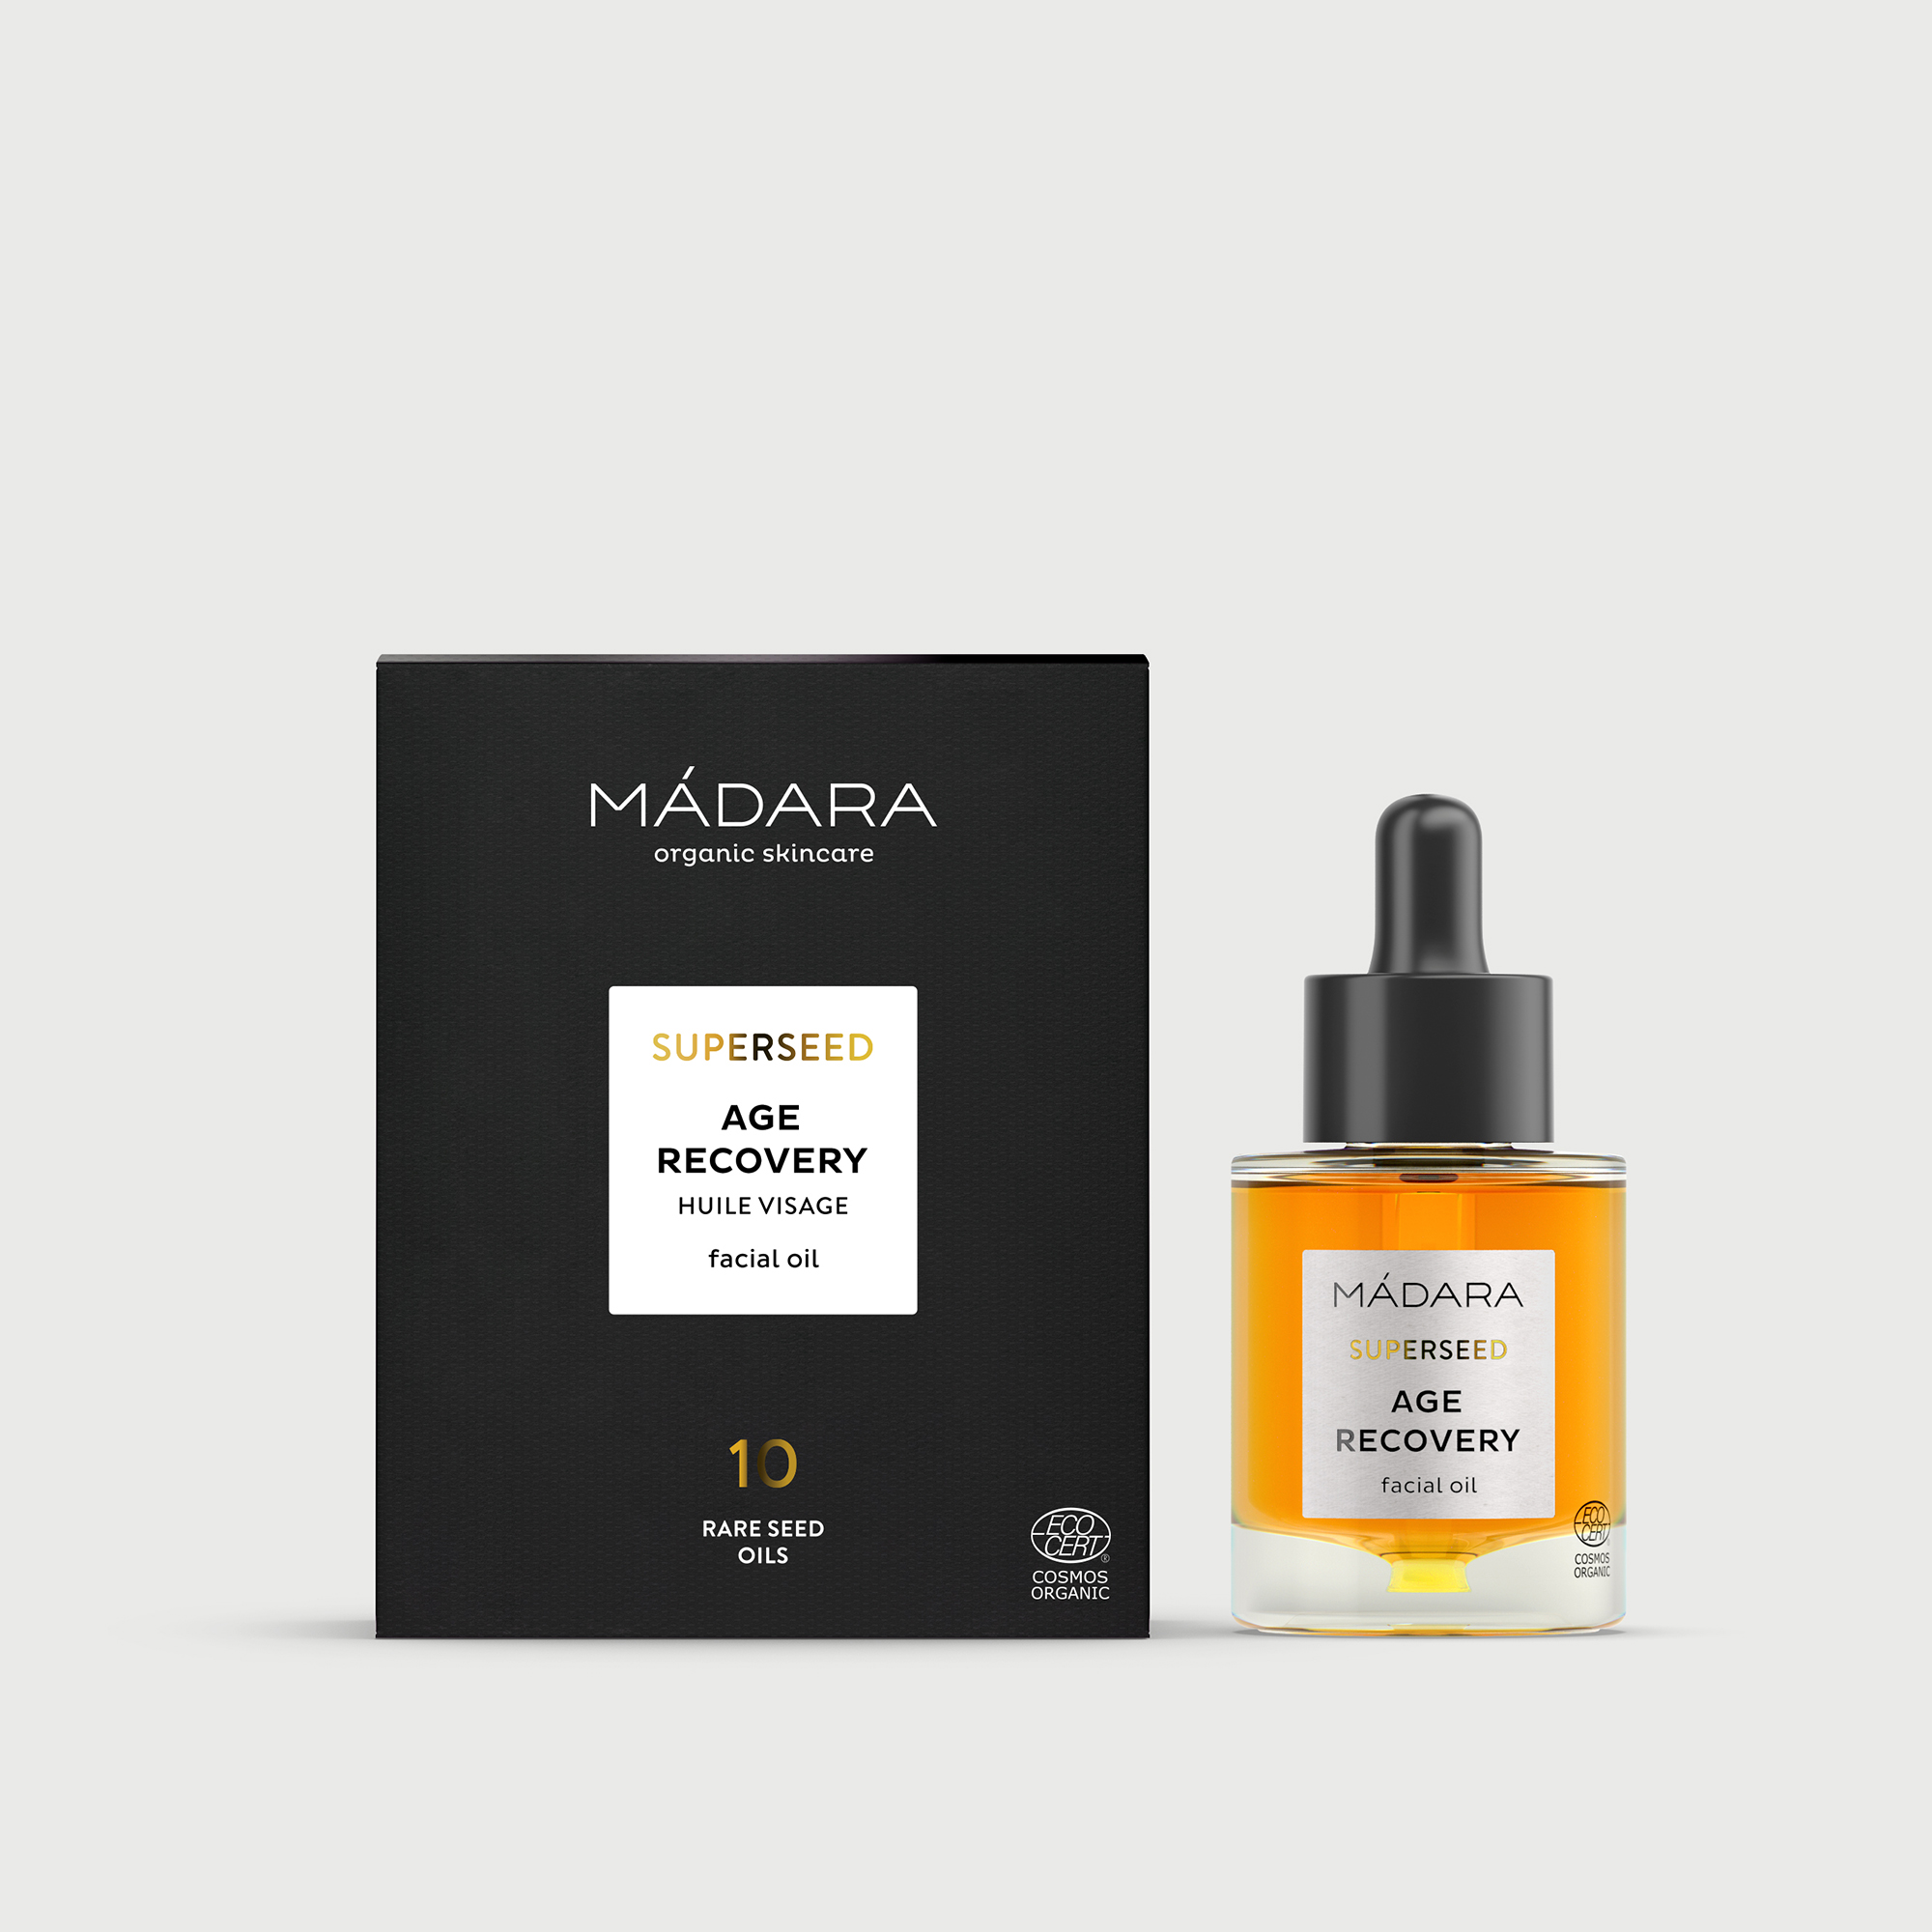 Mádara Superseed Age Recovery Facial Oil